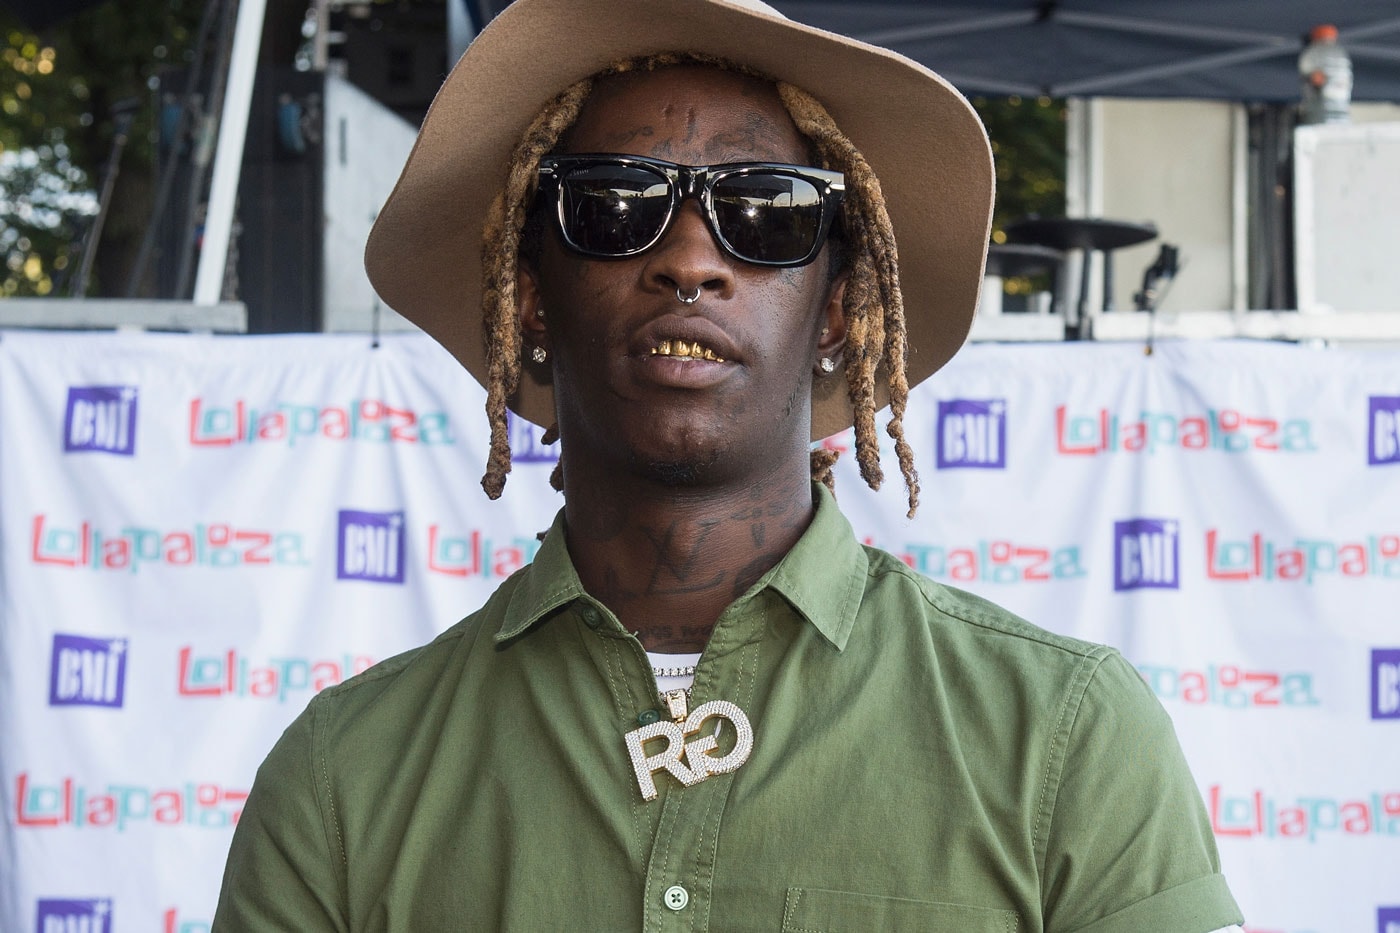 Young Thug Speaks on His Preference For Women's Clothing